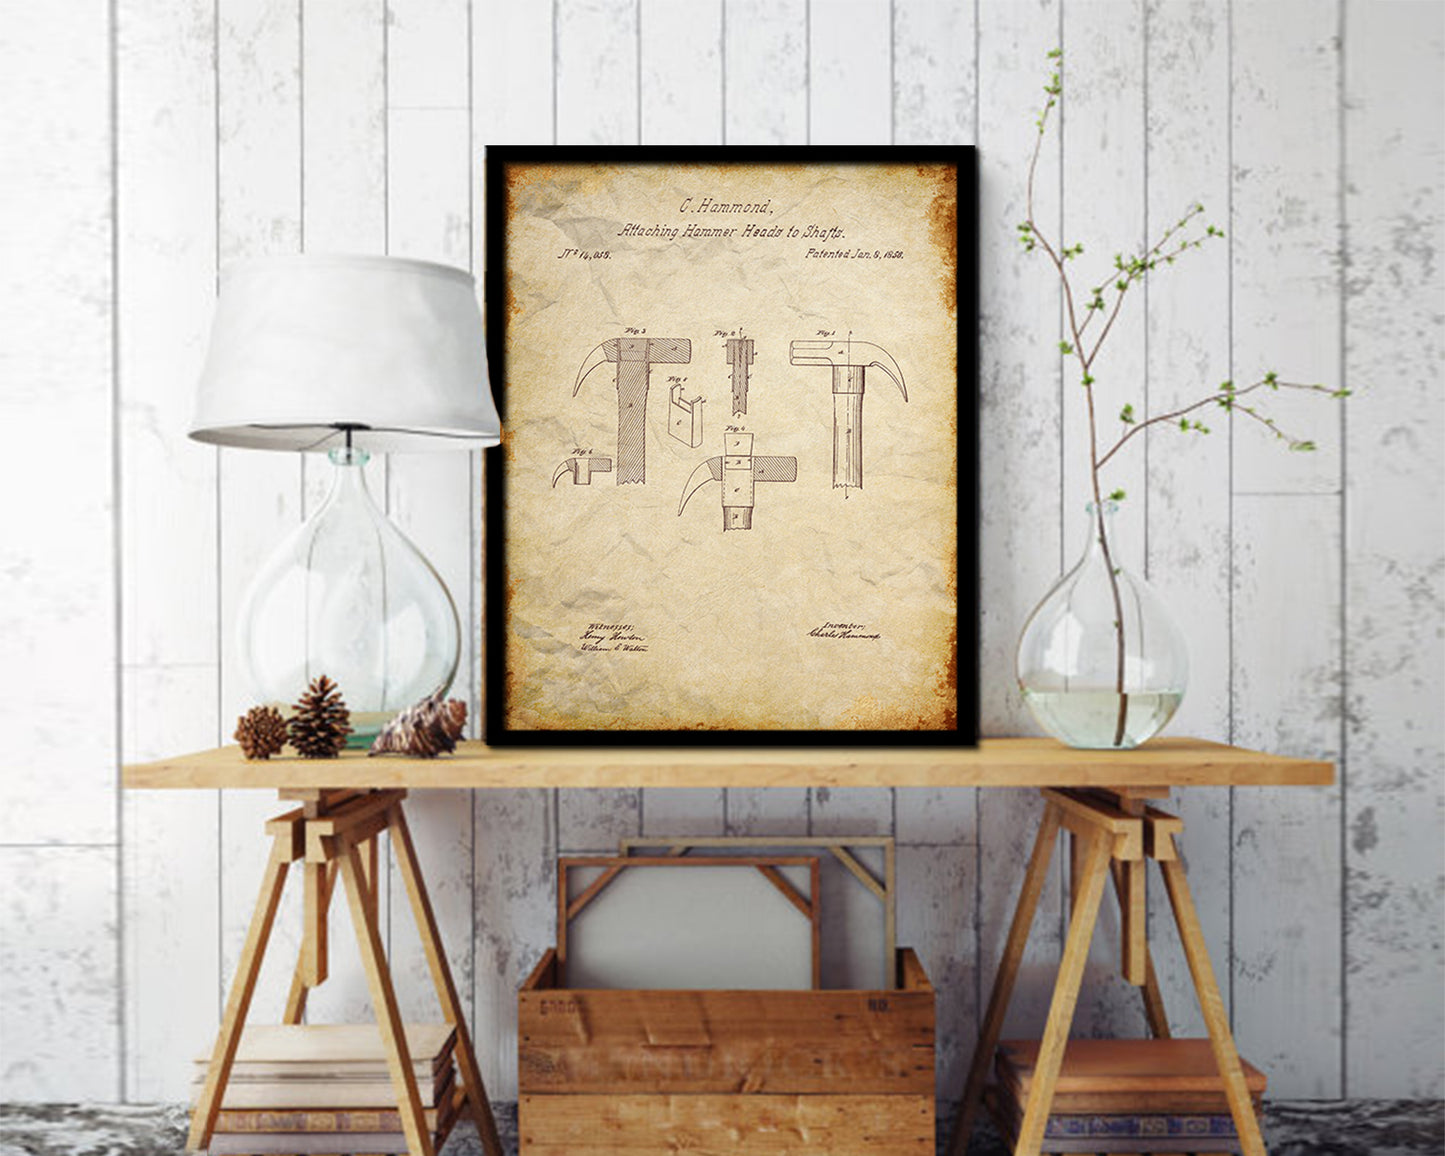 Attaching Hammer Heads to Shafts Tools Vintage Patent Artwork Walnut Frame Gifts